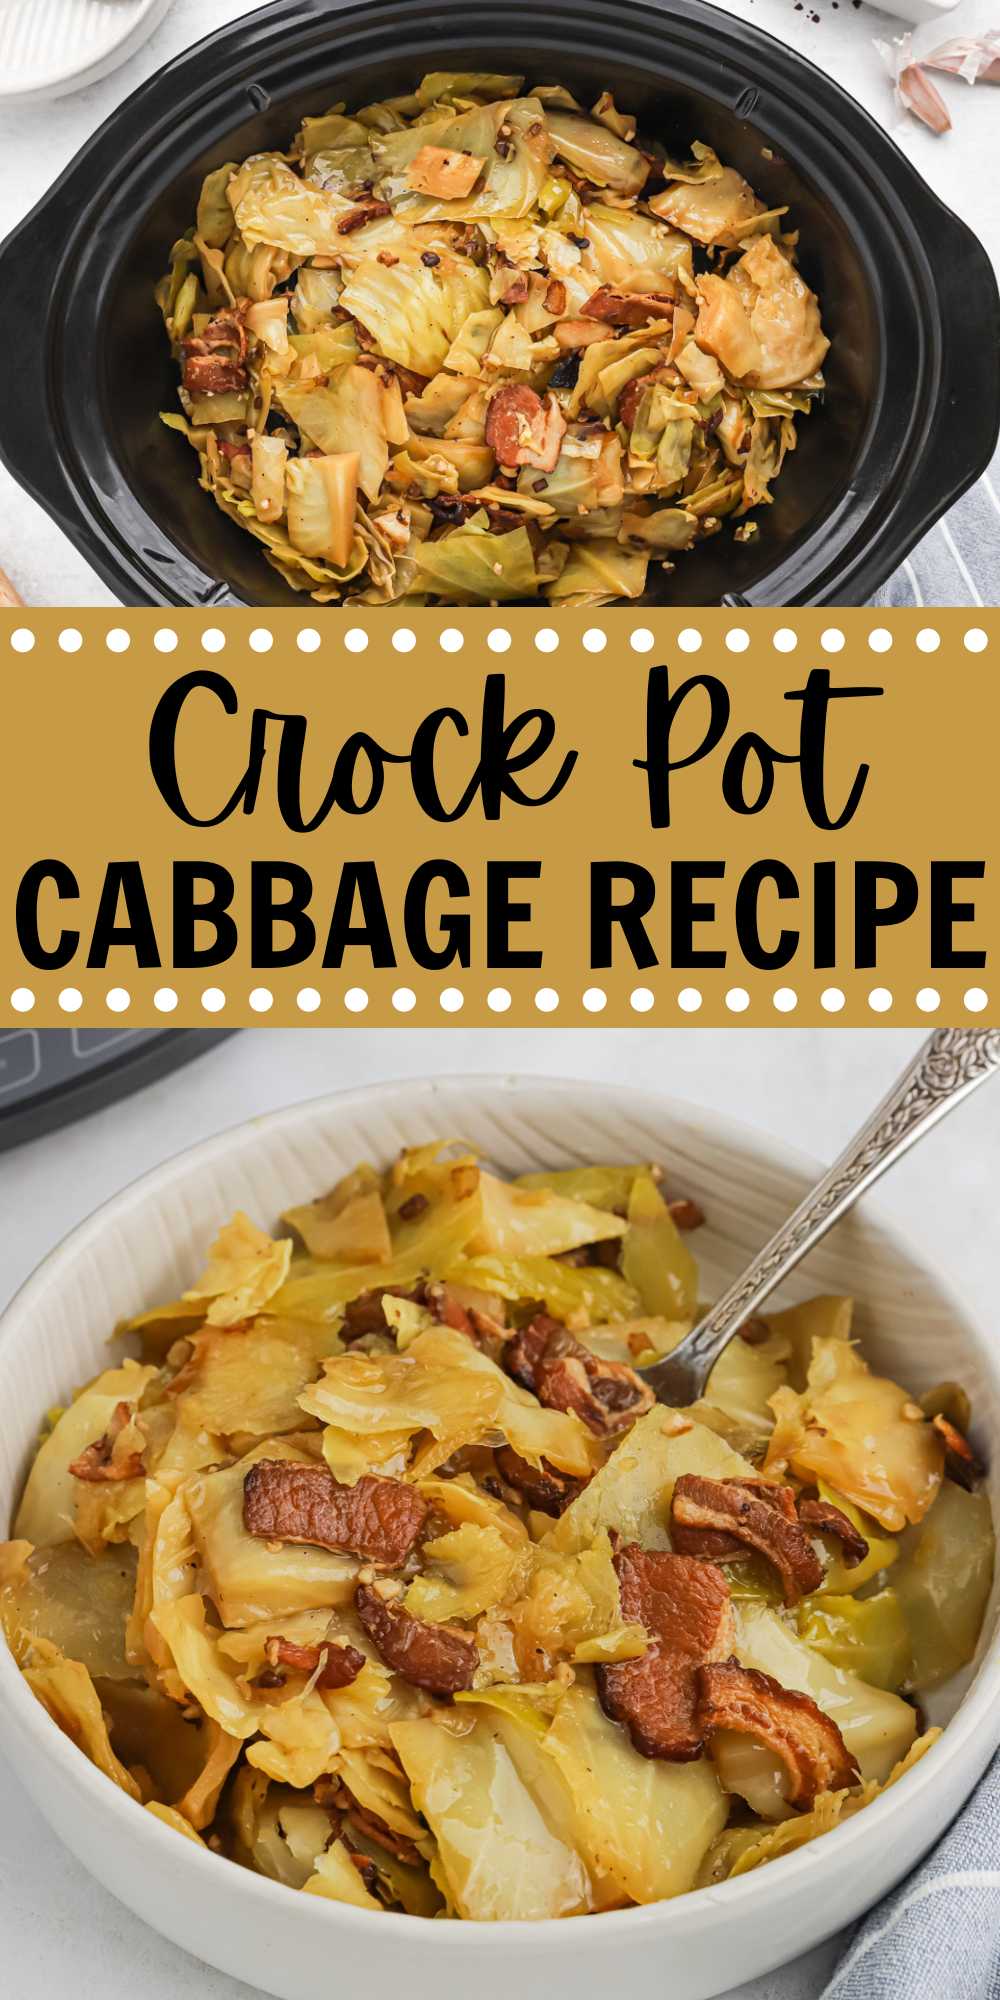 Crock Pot Cabbage is a delicious side dish that can be served with many recipes. This cabbage recipe is loaded with flavor and easy to make. Cabbage is a vegetable that doesn't get made very often, but when we do we love to cook it in the slow cooker. This recipe is made with simple ingredients which makes this dish so flavorful. #eatingonadime #crockpotcabbage #cabbagerecipes